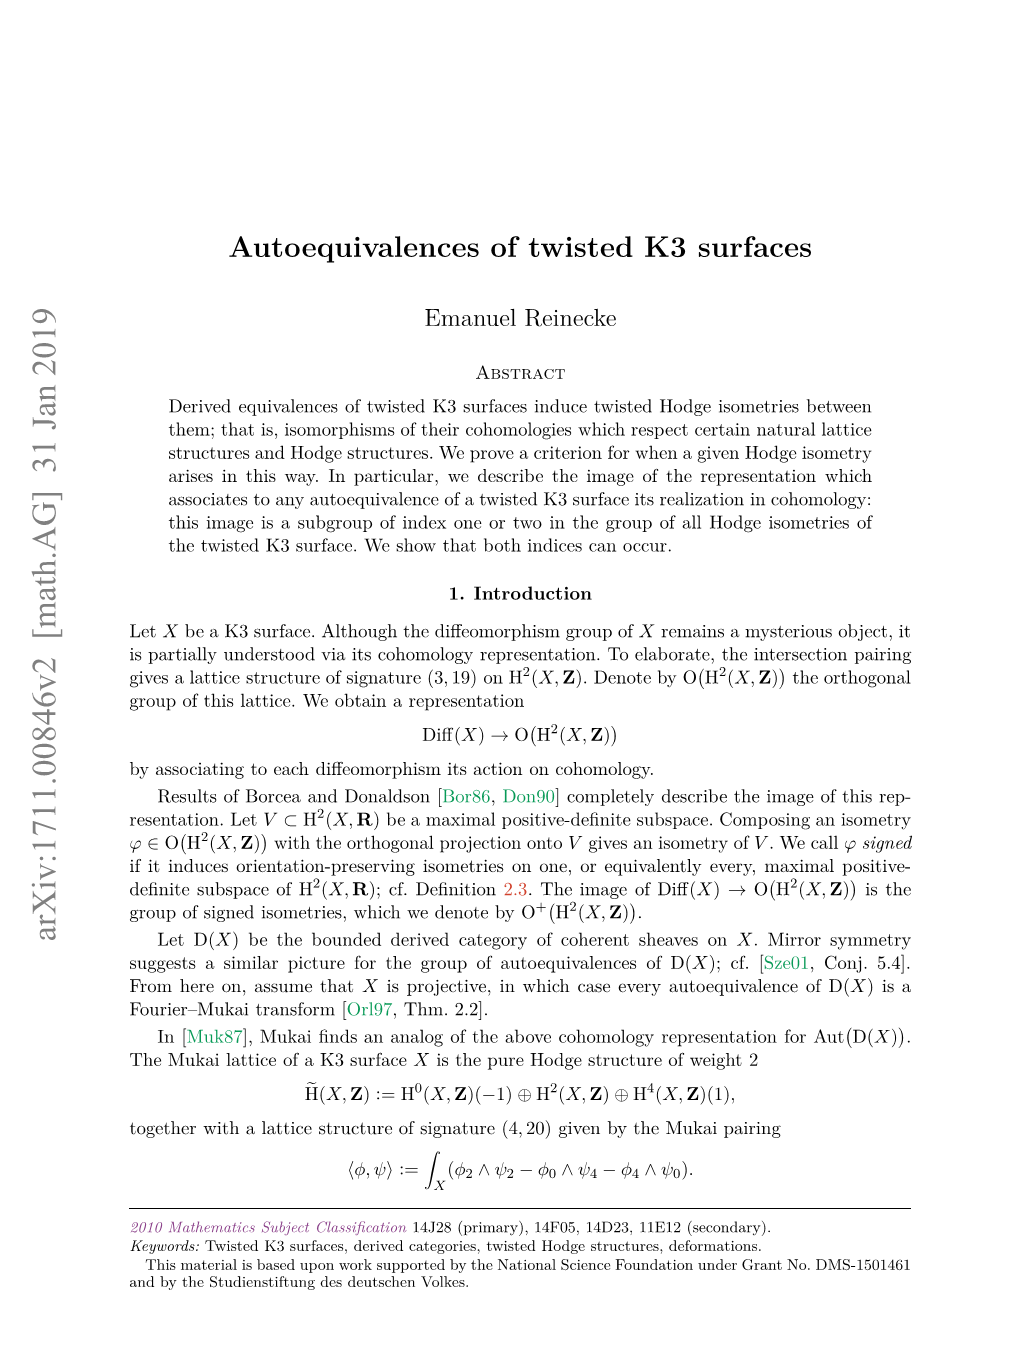 Autoequivalences of Twisted K3 Surfaces Theorem for Twisted K3 Surfaces